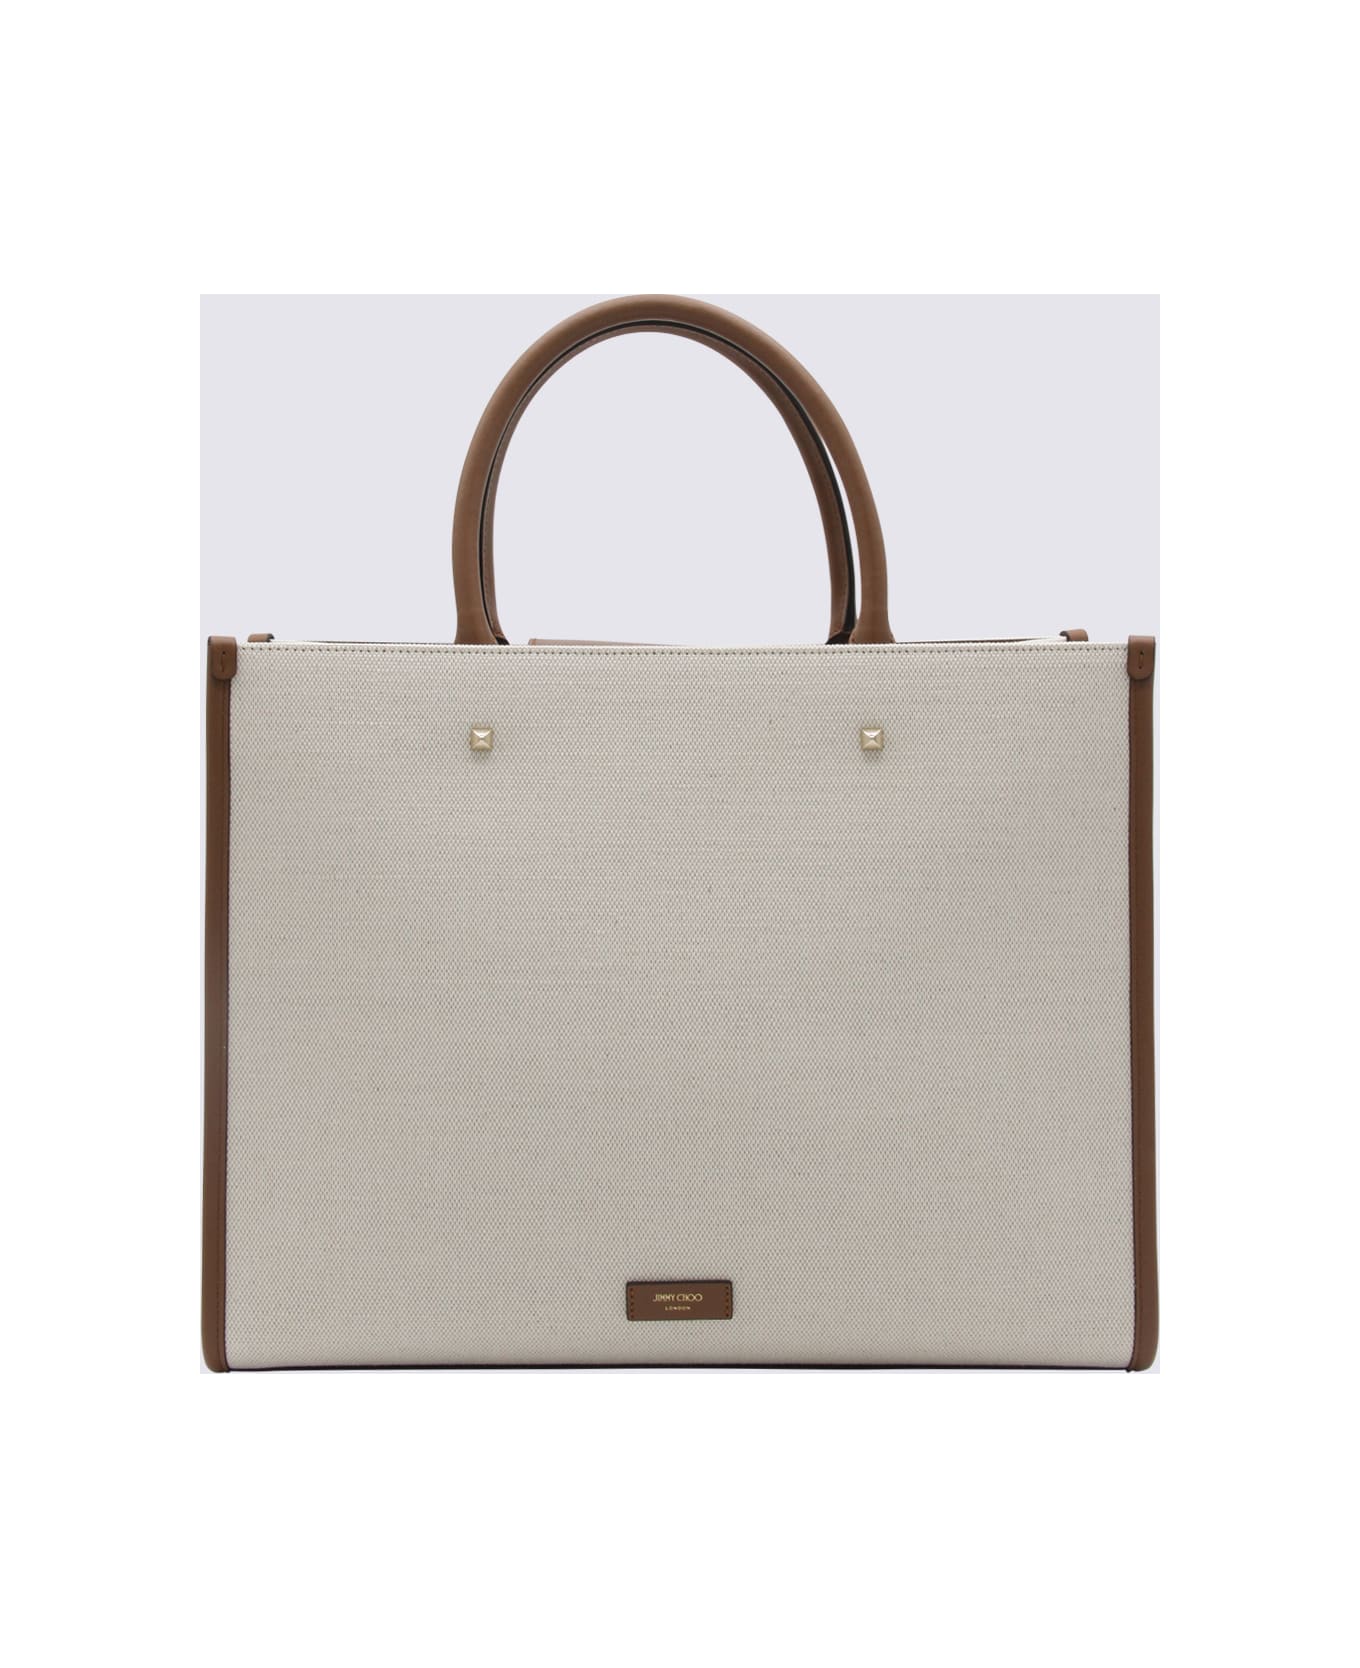 Jimmy Choo Natural And Taupe Canvas Avenue Medium Tote Bag - NATURAL/TAUPE/DT/L トートバッグ